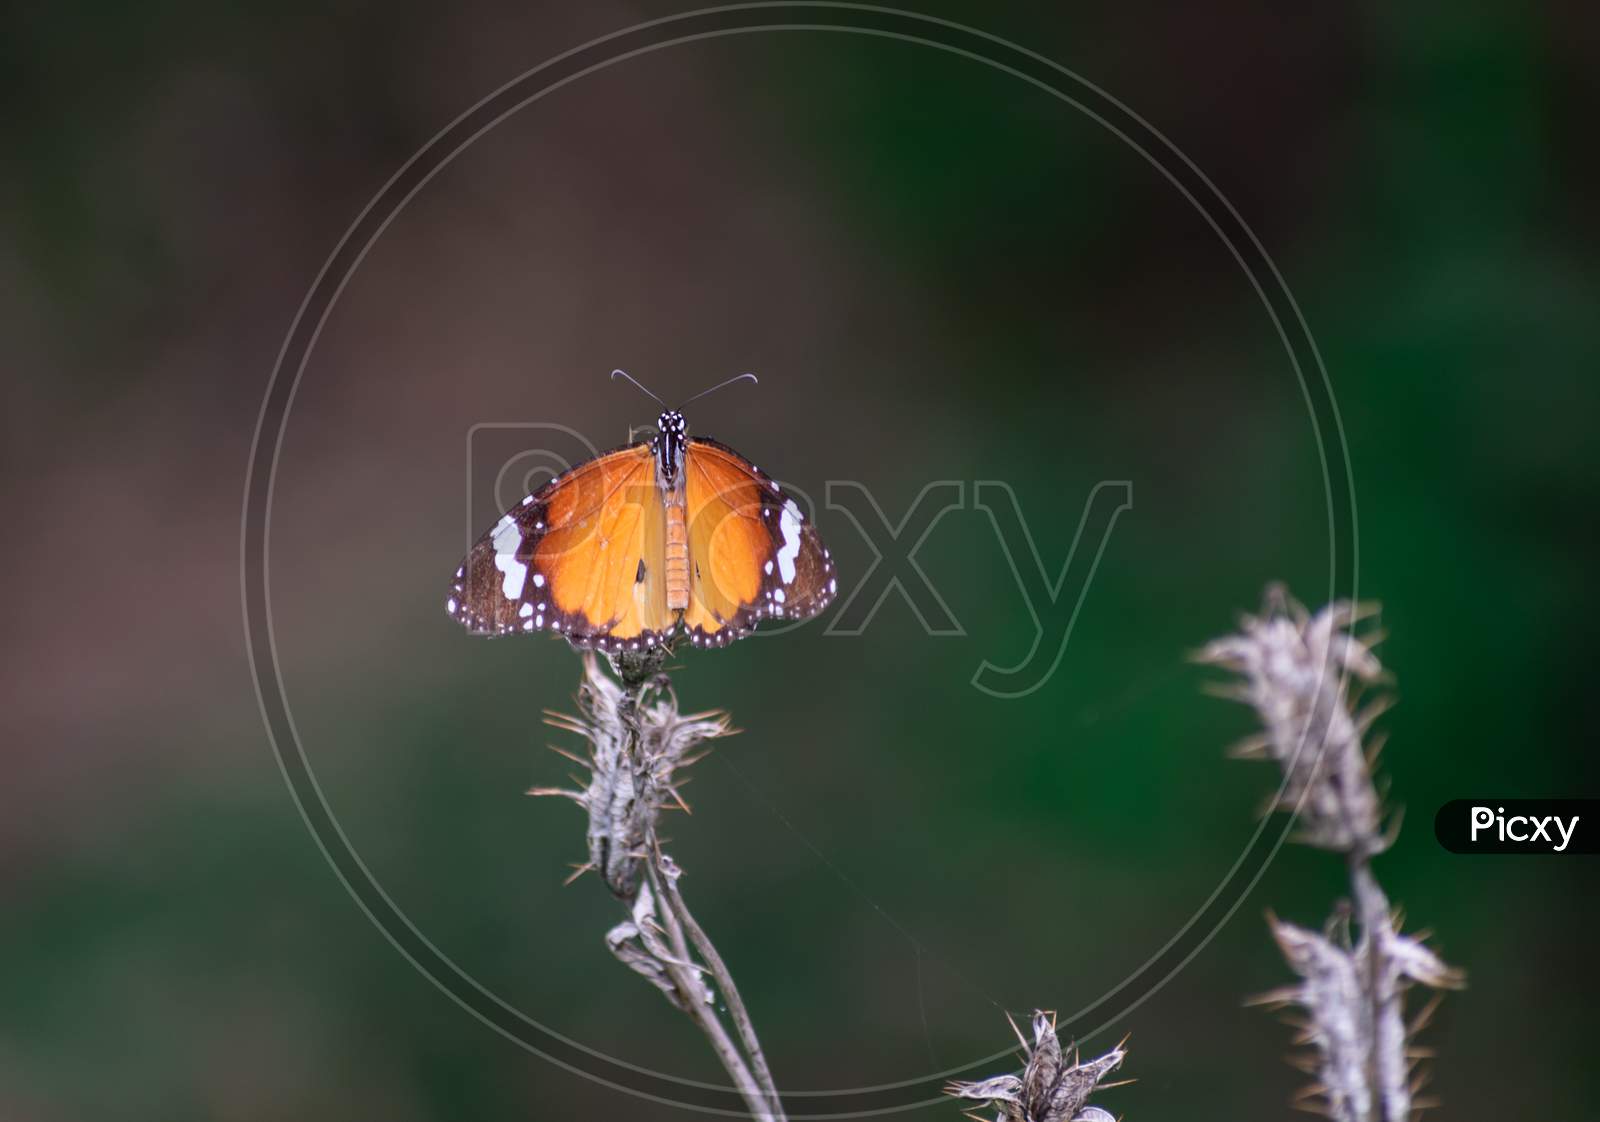 COMMON ORANGE TIGER BUTTERFLY SITTING ON A CACTUS